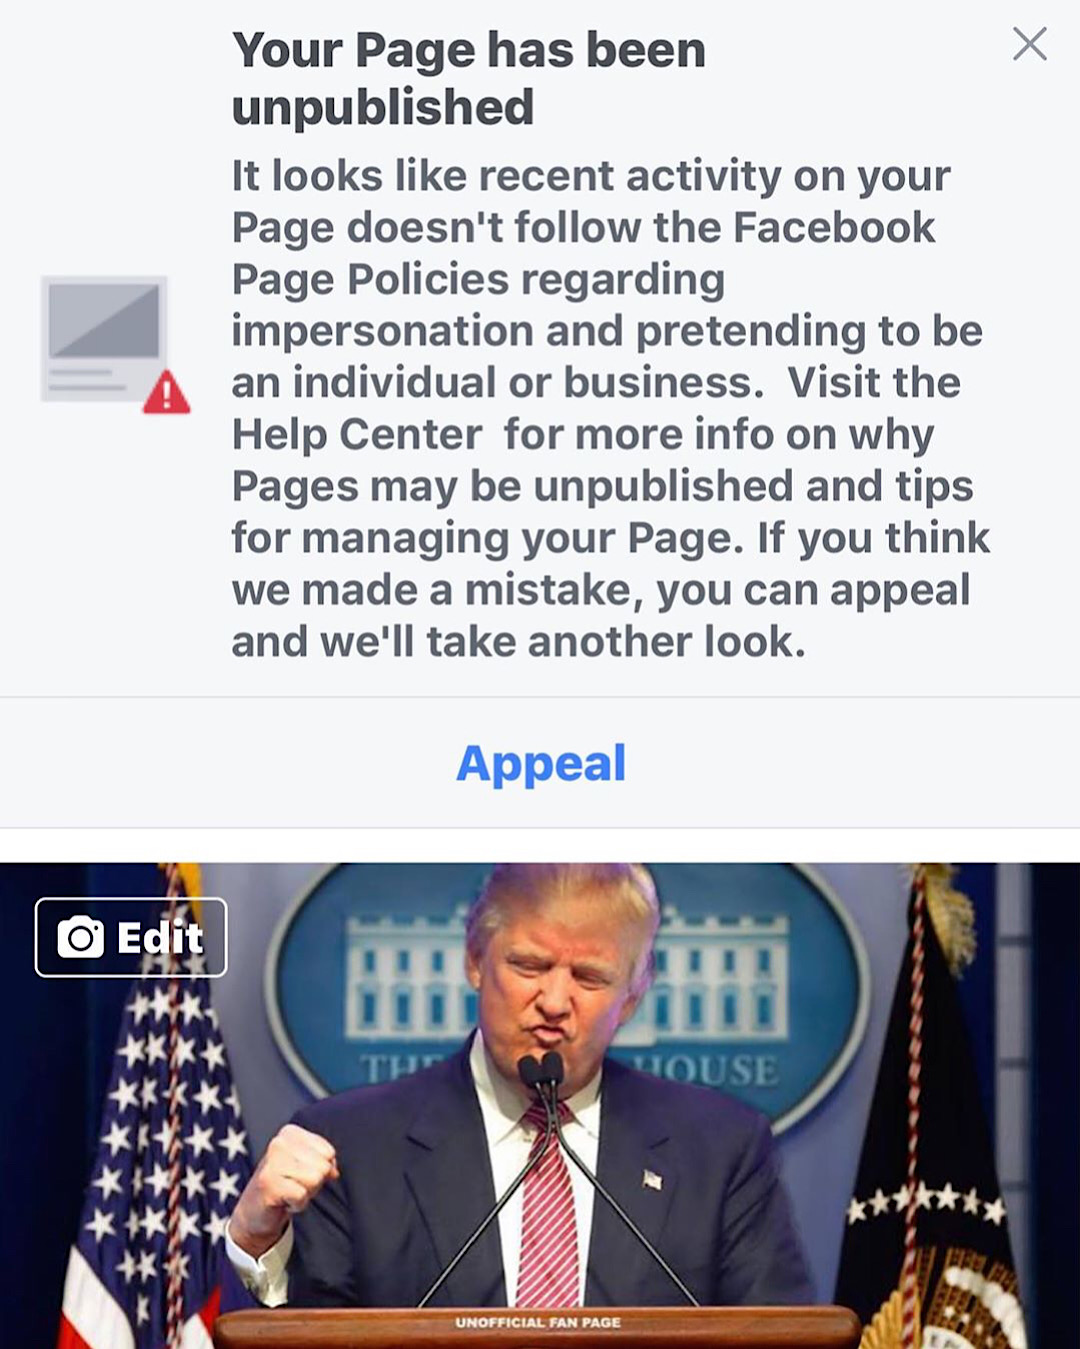 The message Facebook sent to the “Donald Trump Is Our President” page after unpublishing it.